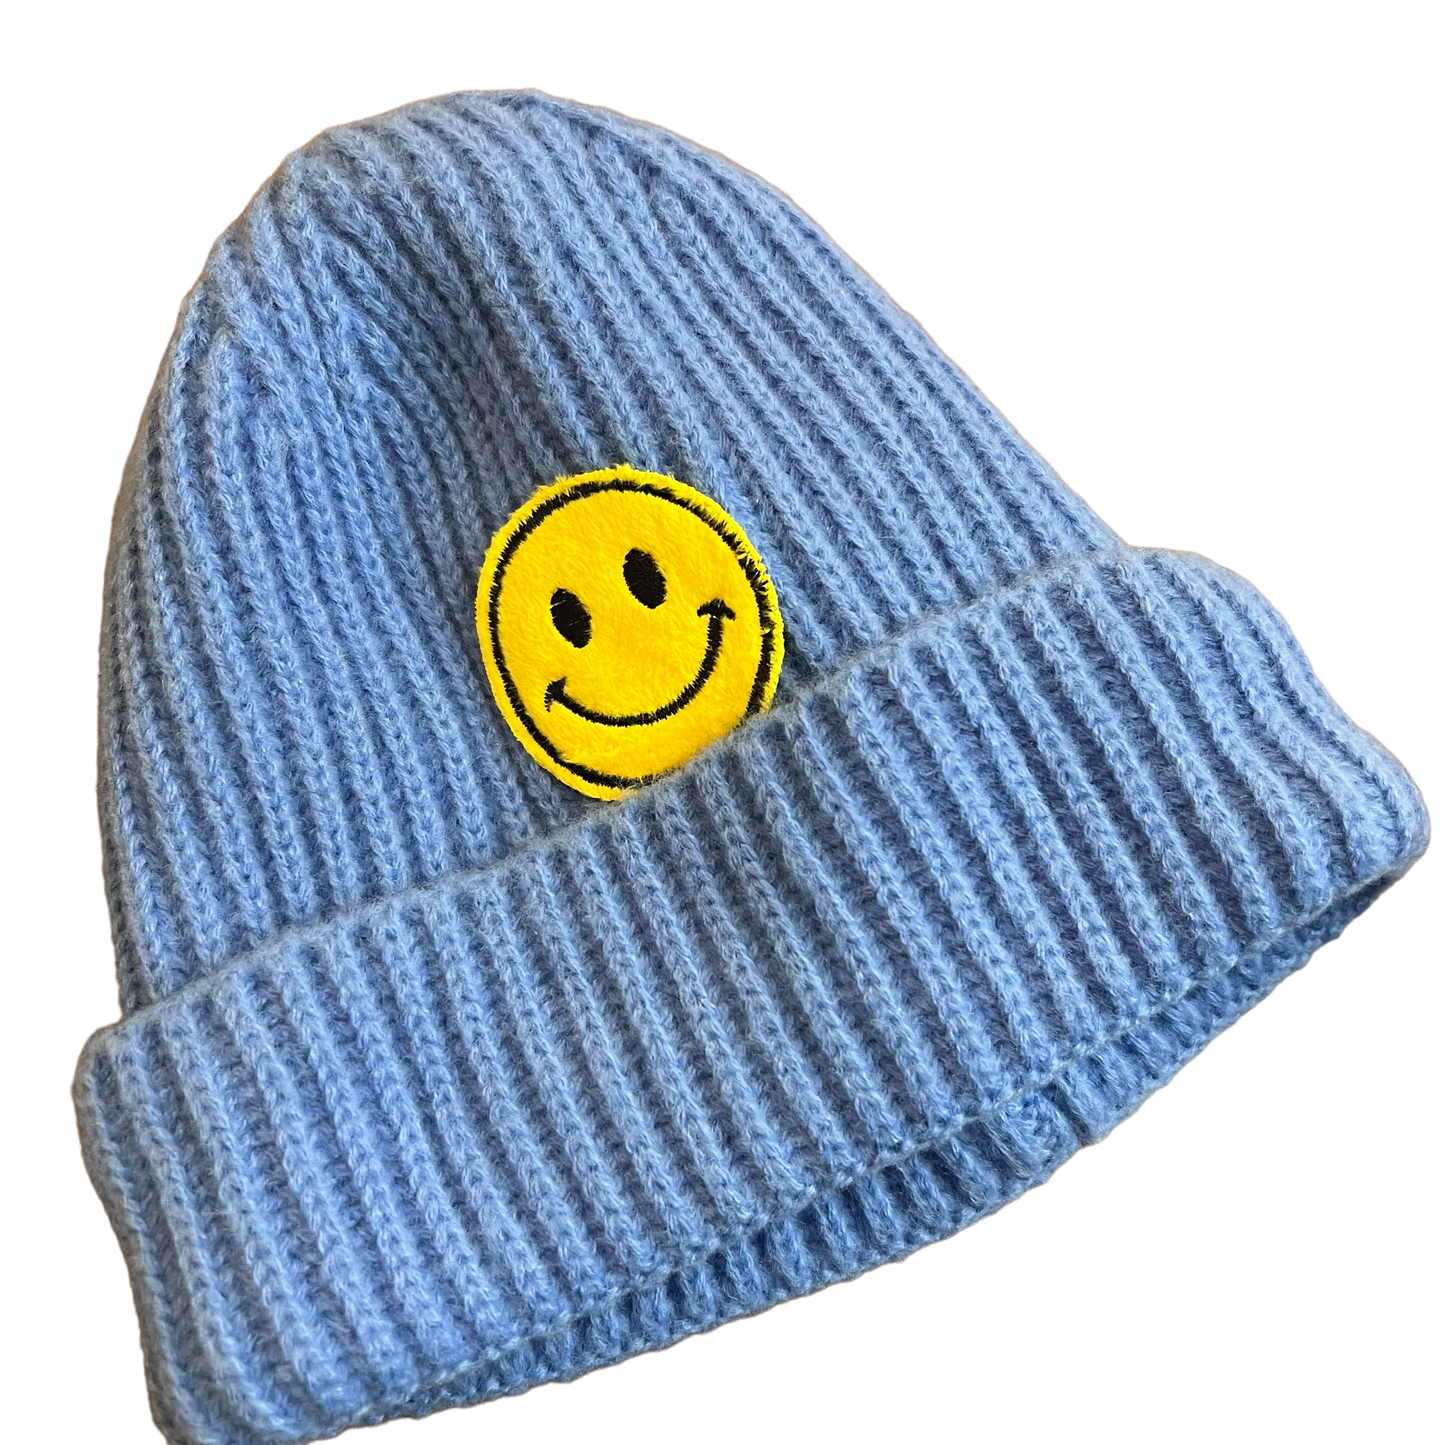 Child Beanies - One Size Fits